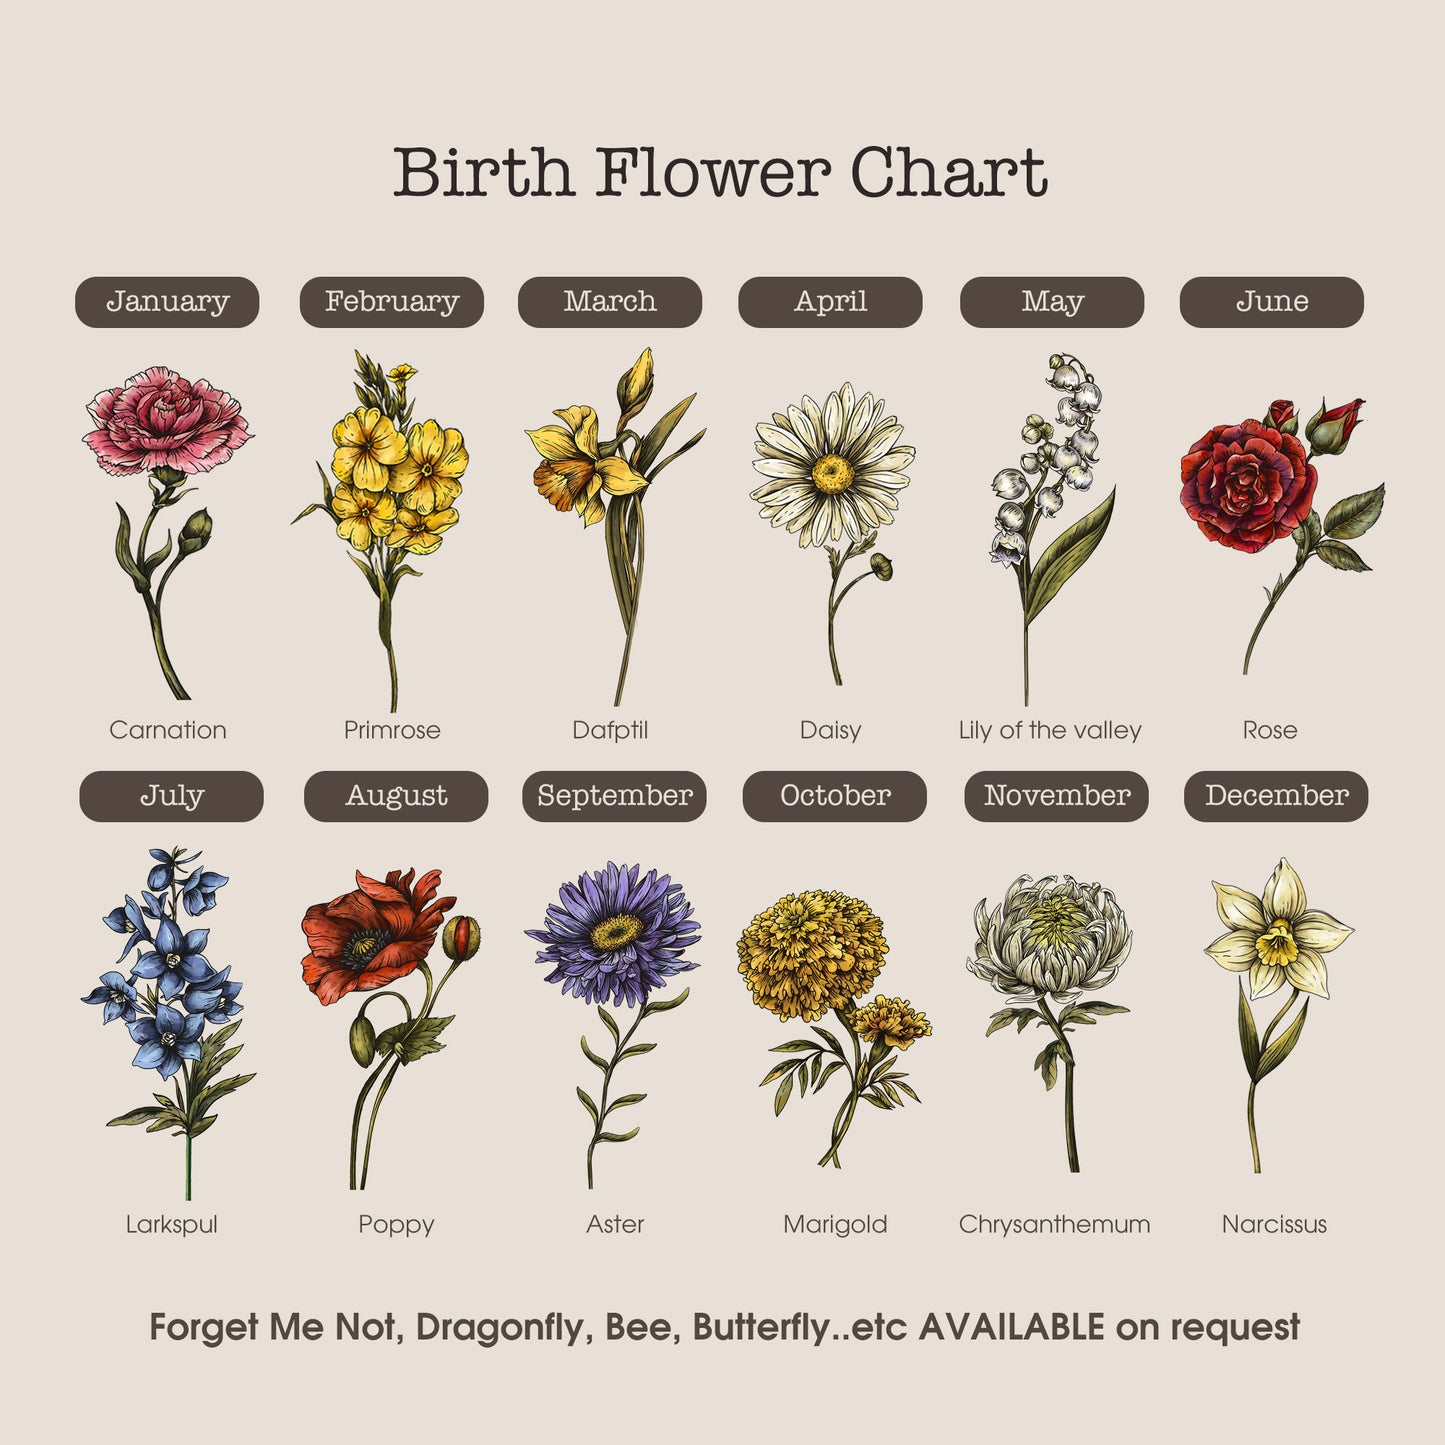 50%OFF🌷Birth Flower Family Bouquet Personalized Names Frame